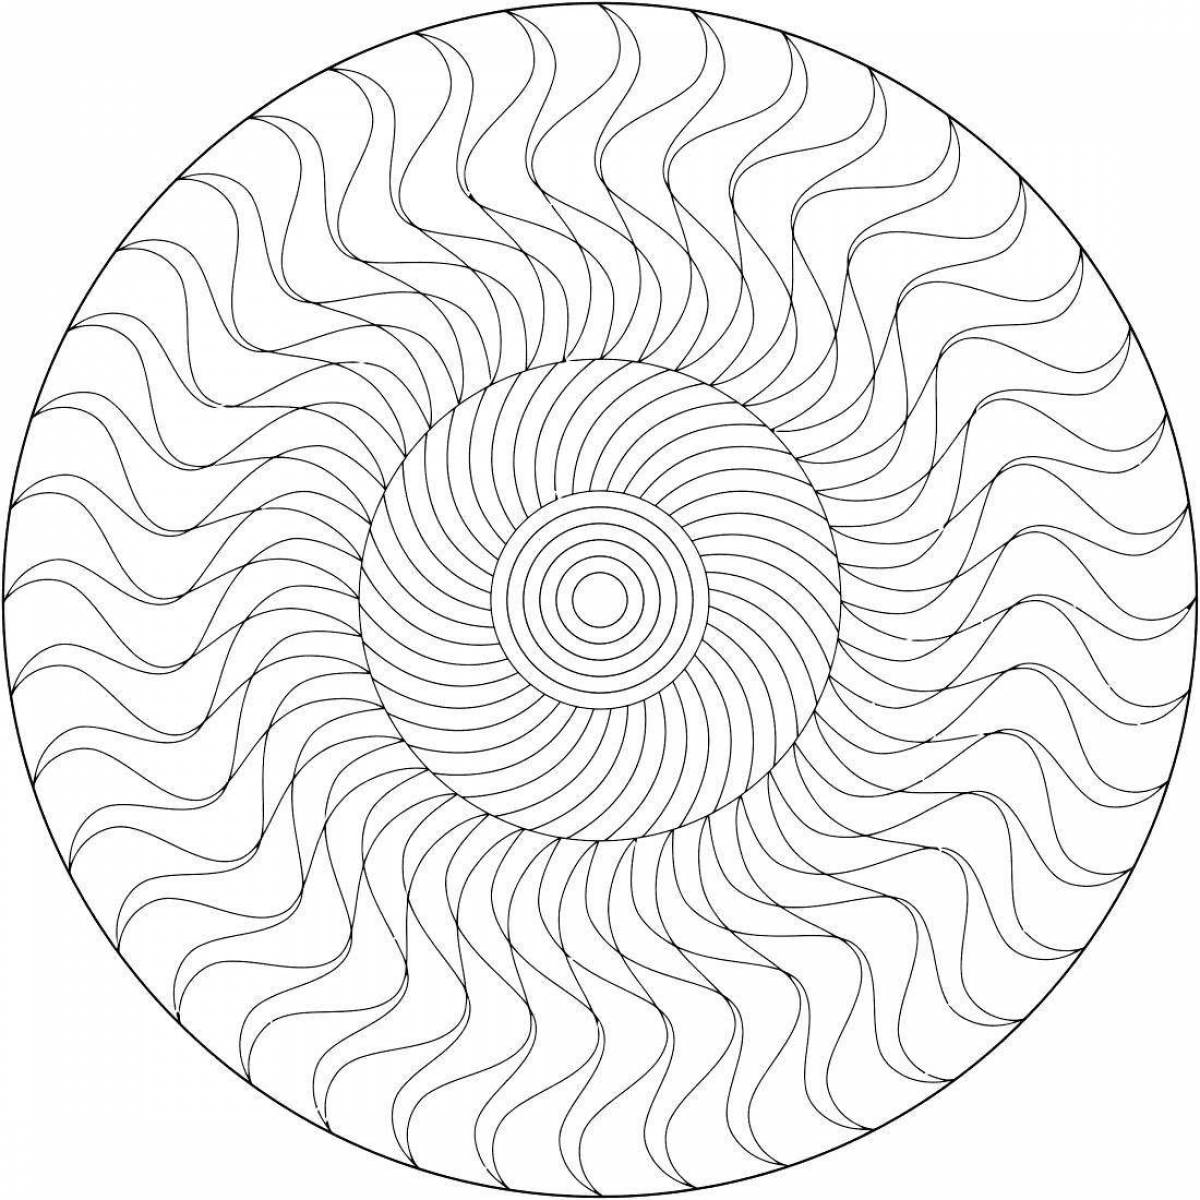 Coloring page playful round spiral